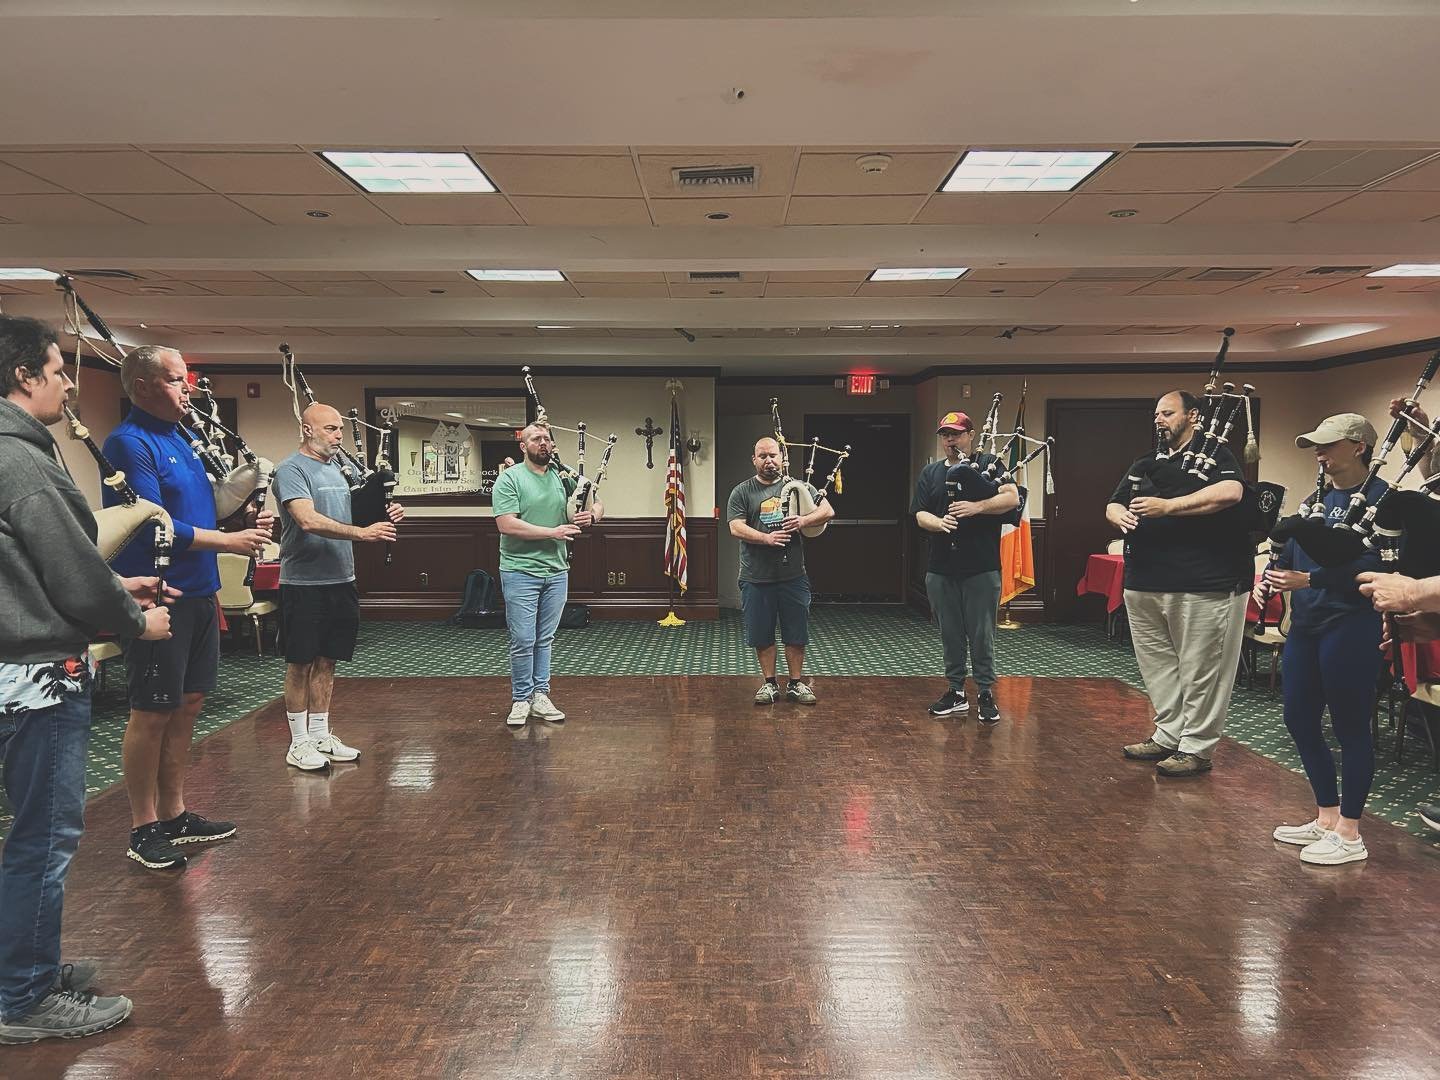 We had a great practice this past weekend in preparation for our travels to Virginia! 

#virginiatattoo #roisindubh #pipeband #eastislip